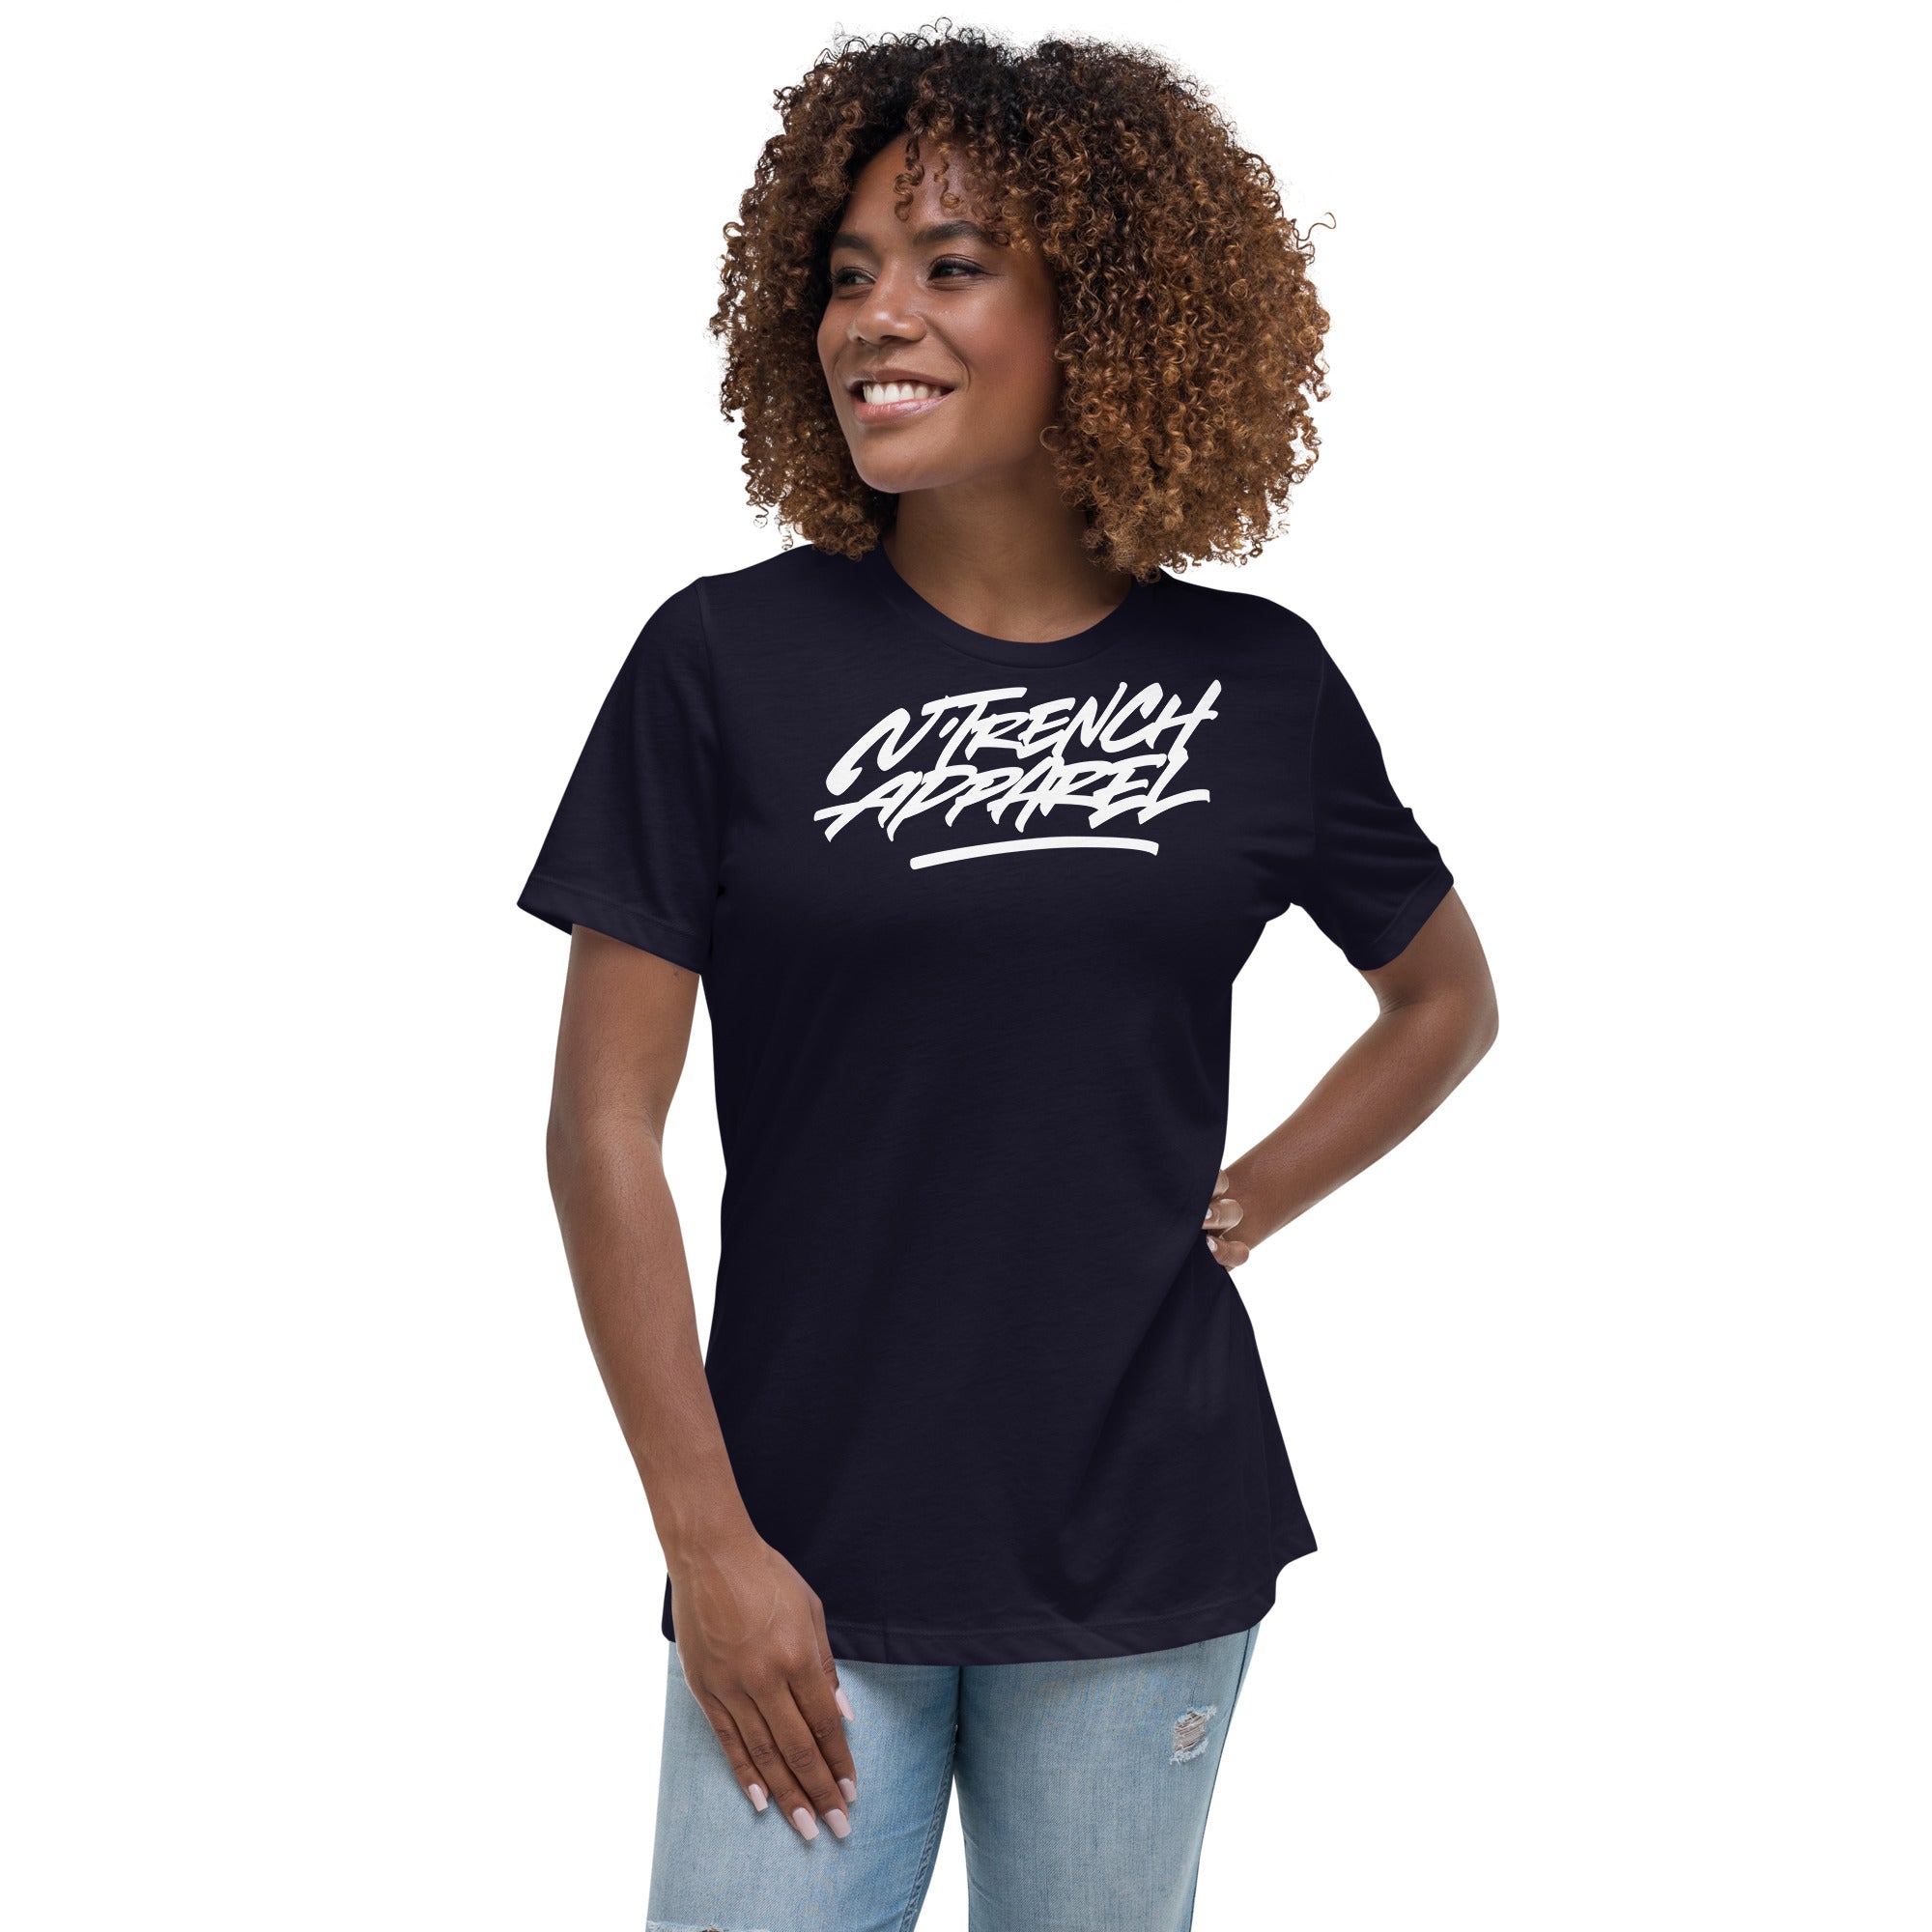 N'Trench Black Font Women/Ladies Relaxed T-Shirt